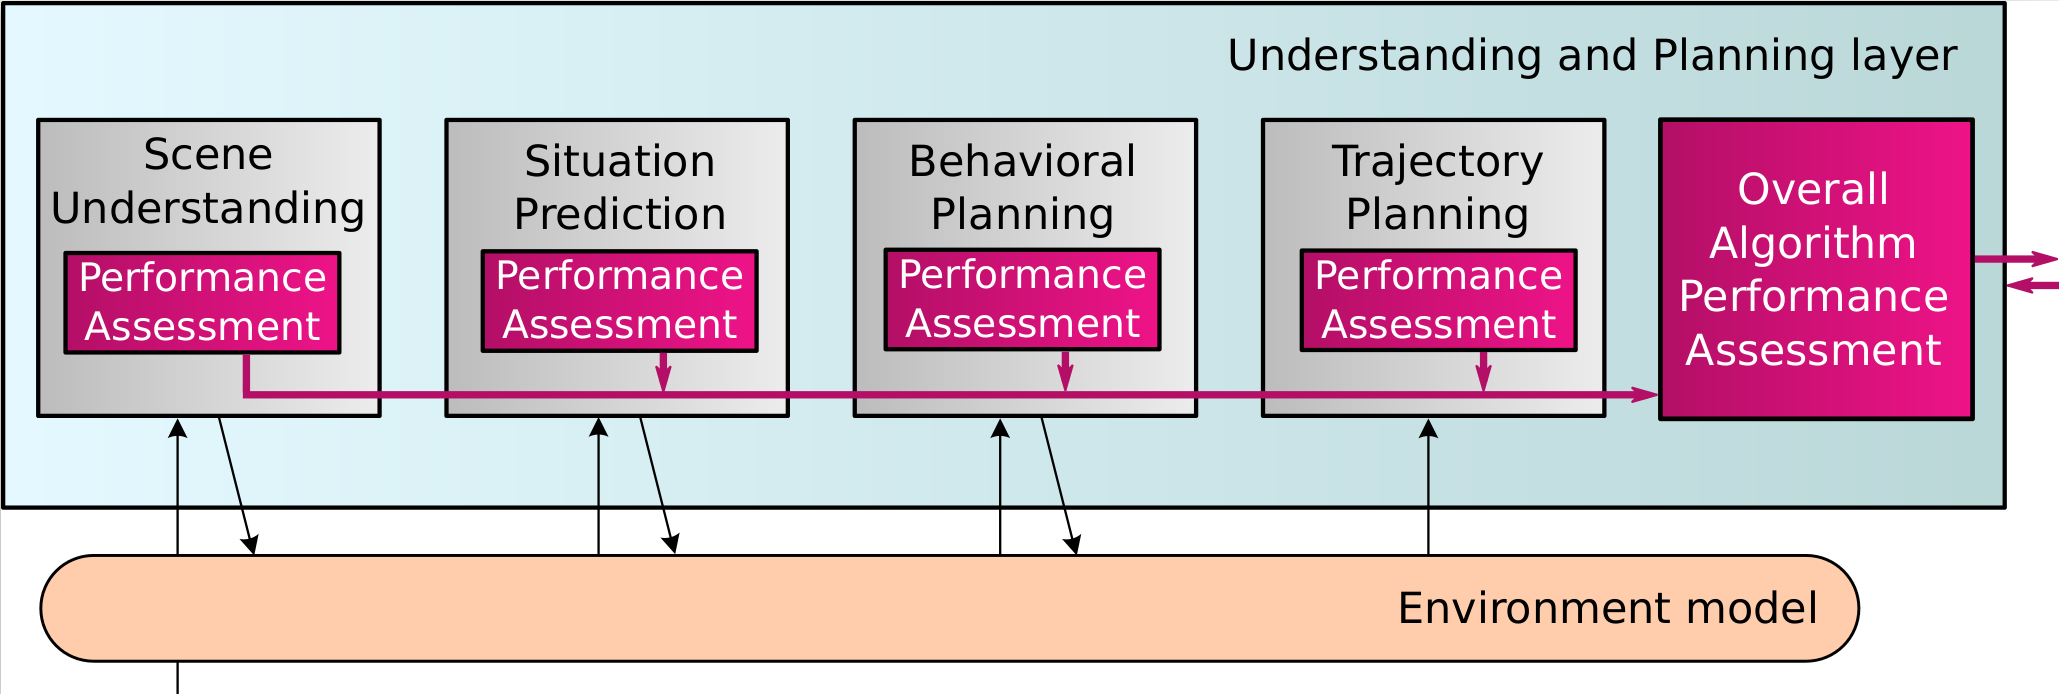 Understanding and Planning layer.